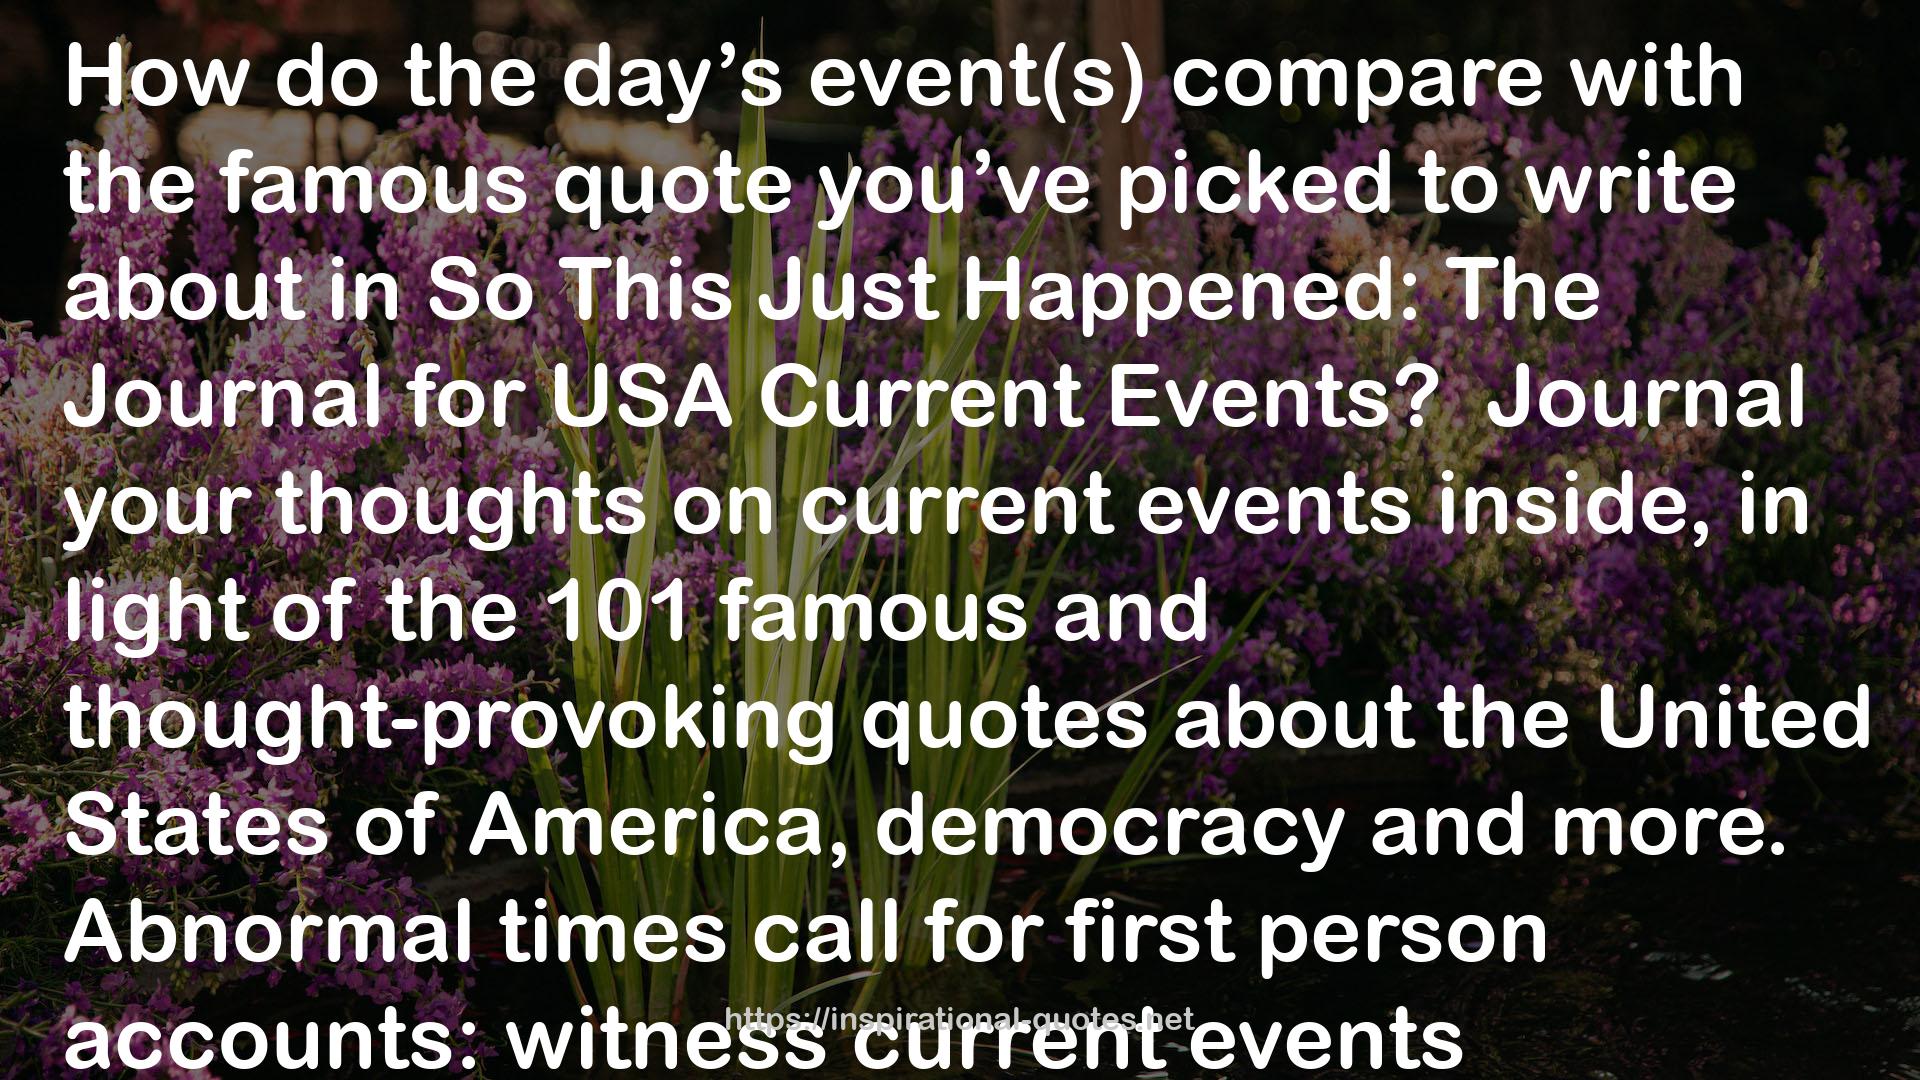 So This Just Happened: The Journal for USA Current Events QUOTES